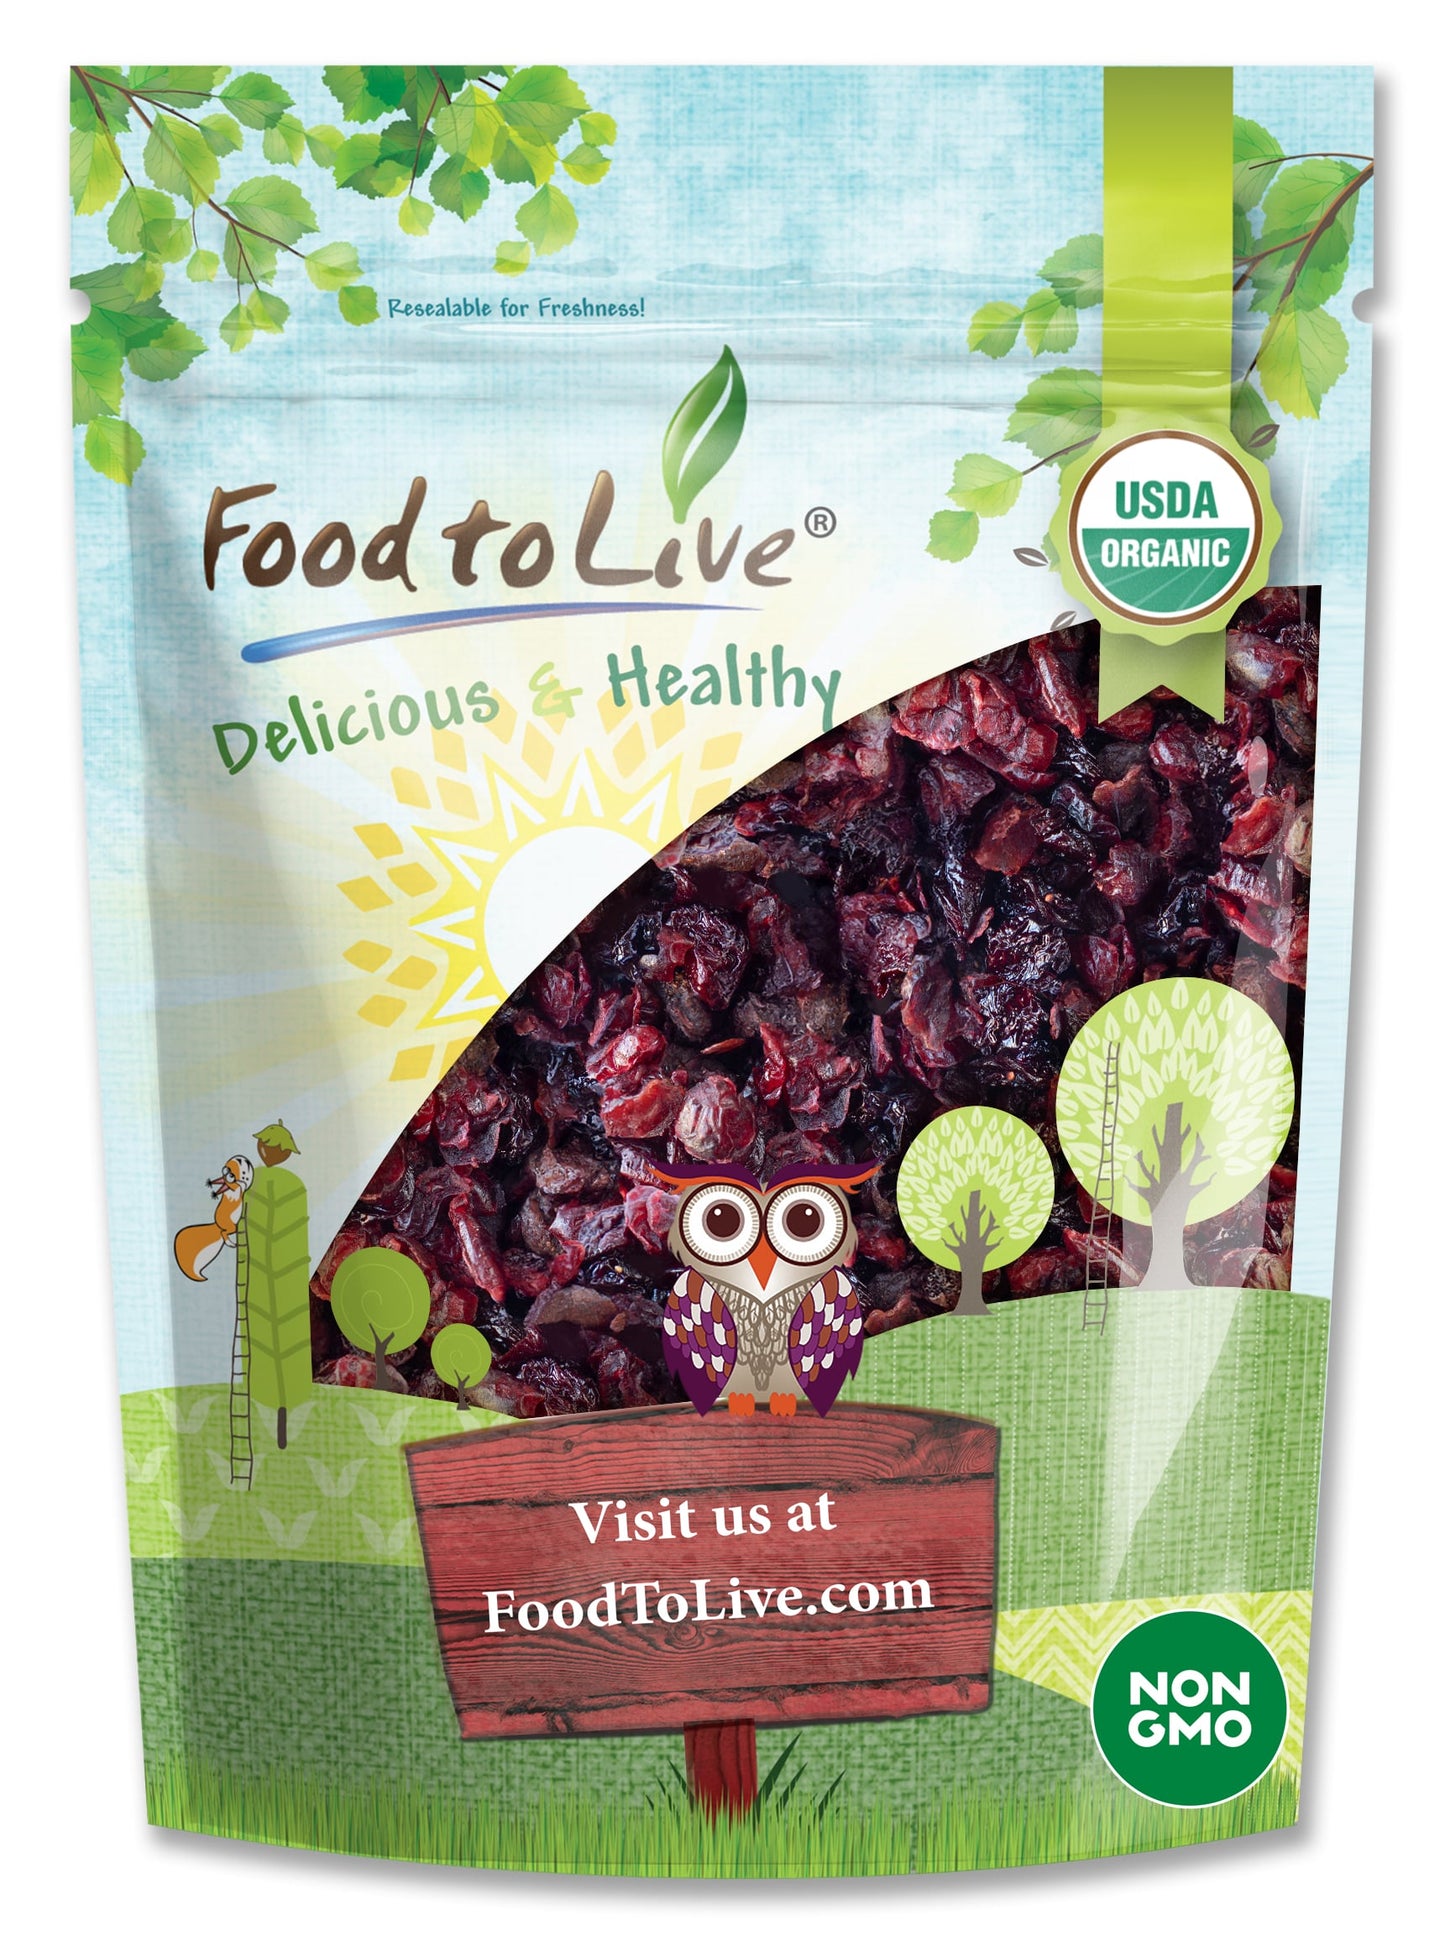 Organic Delightful Berries Mix – A Blend of Non-GMO Dried Cherries & Cranberries. Kosher, Bulk. Gently Infused with Organic Sugar. Lightly Coated with Organic Sunflower Oil